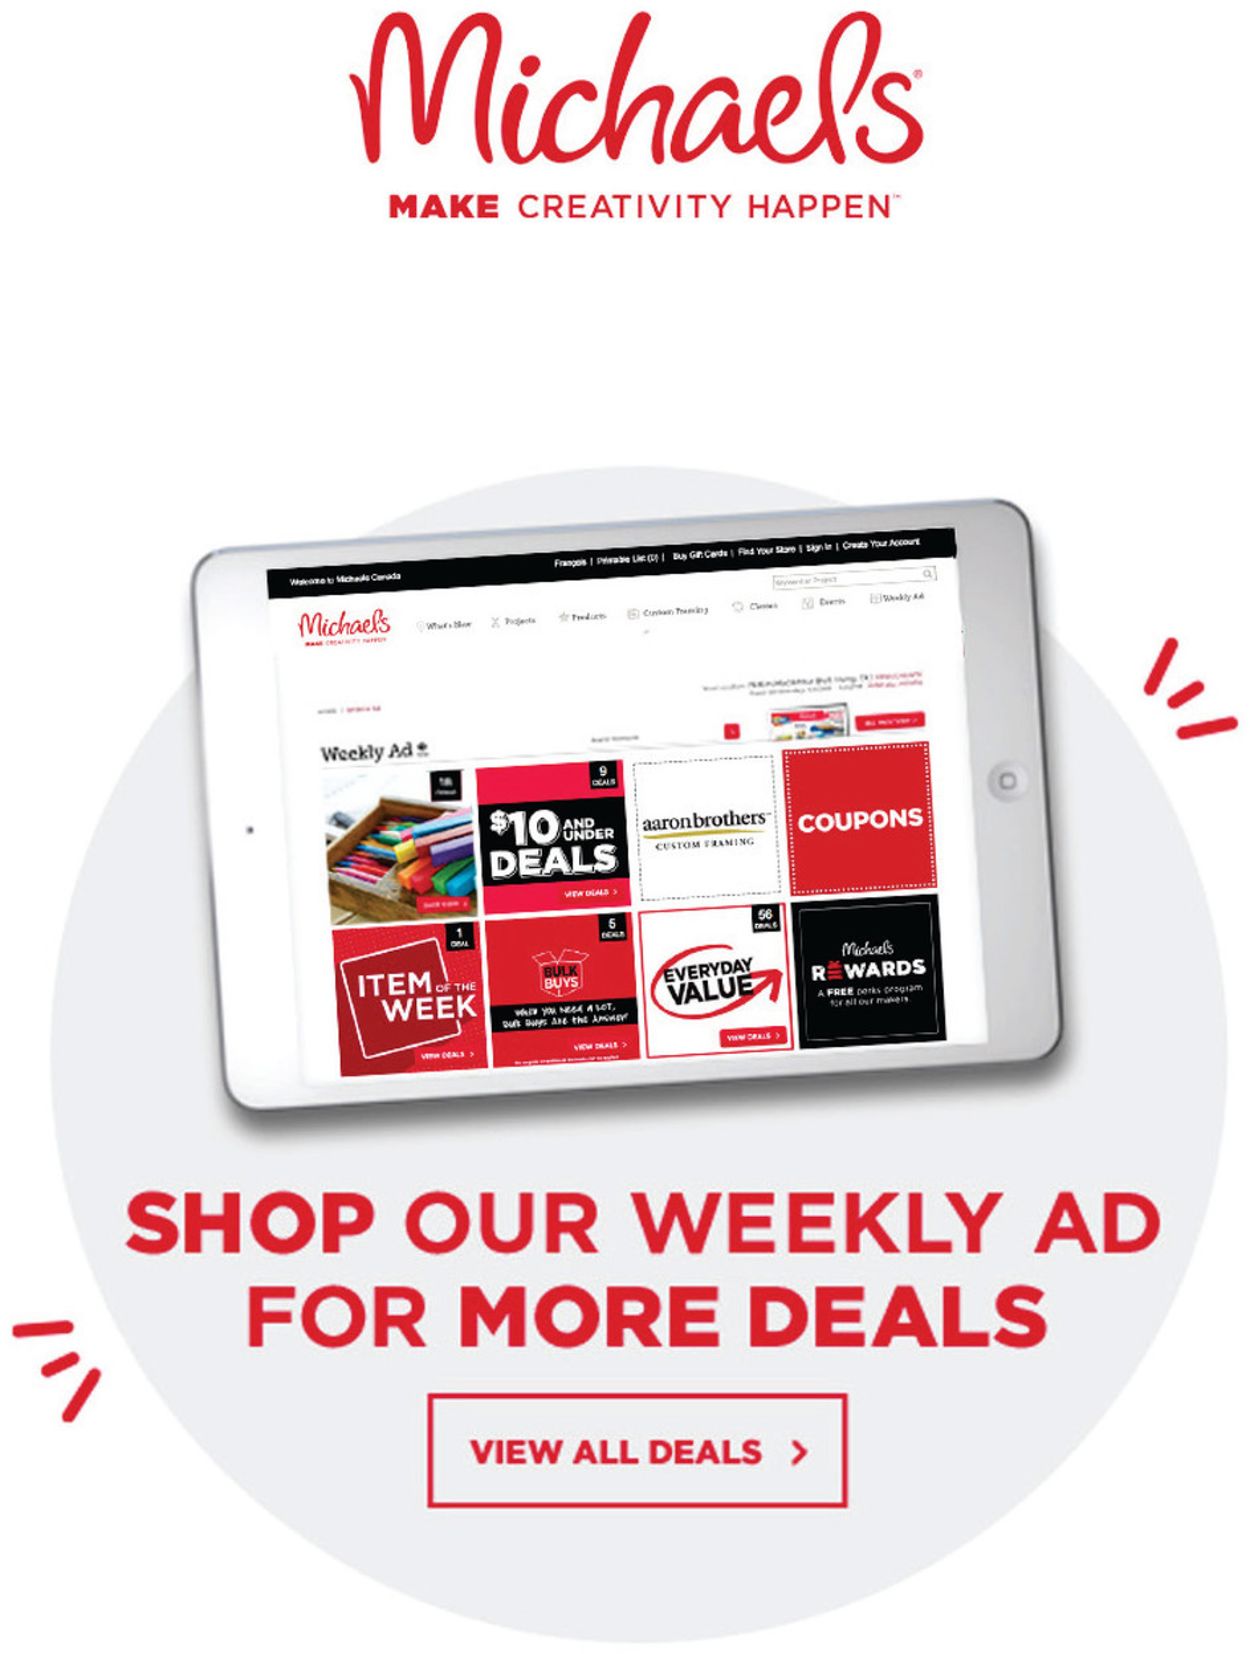 Office DEPOT Ad from 10/16/2020